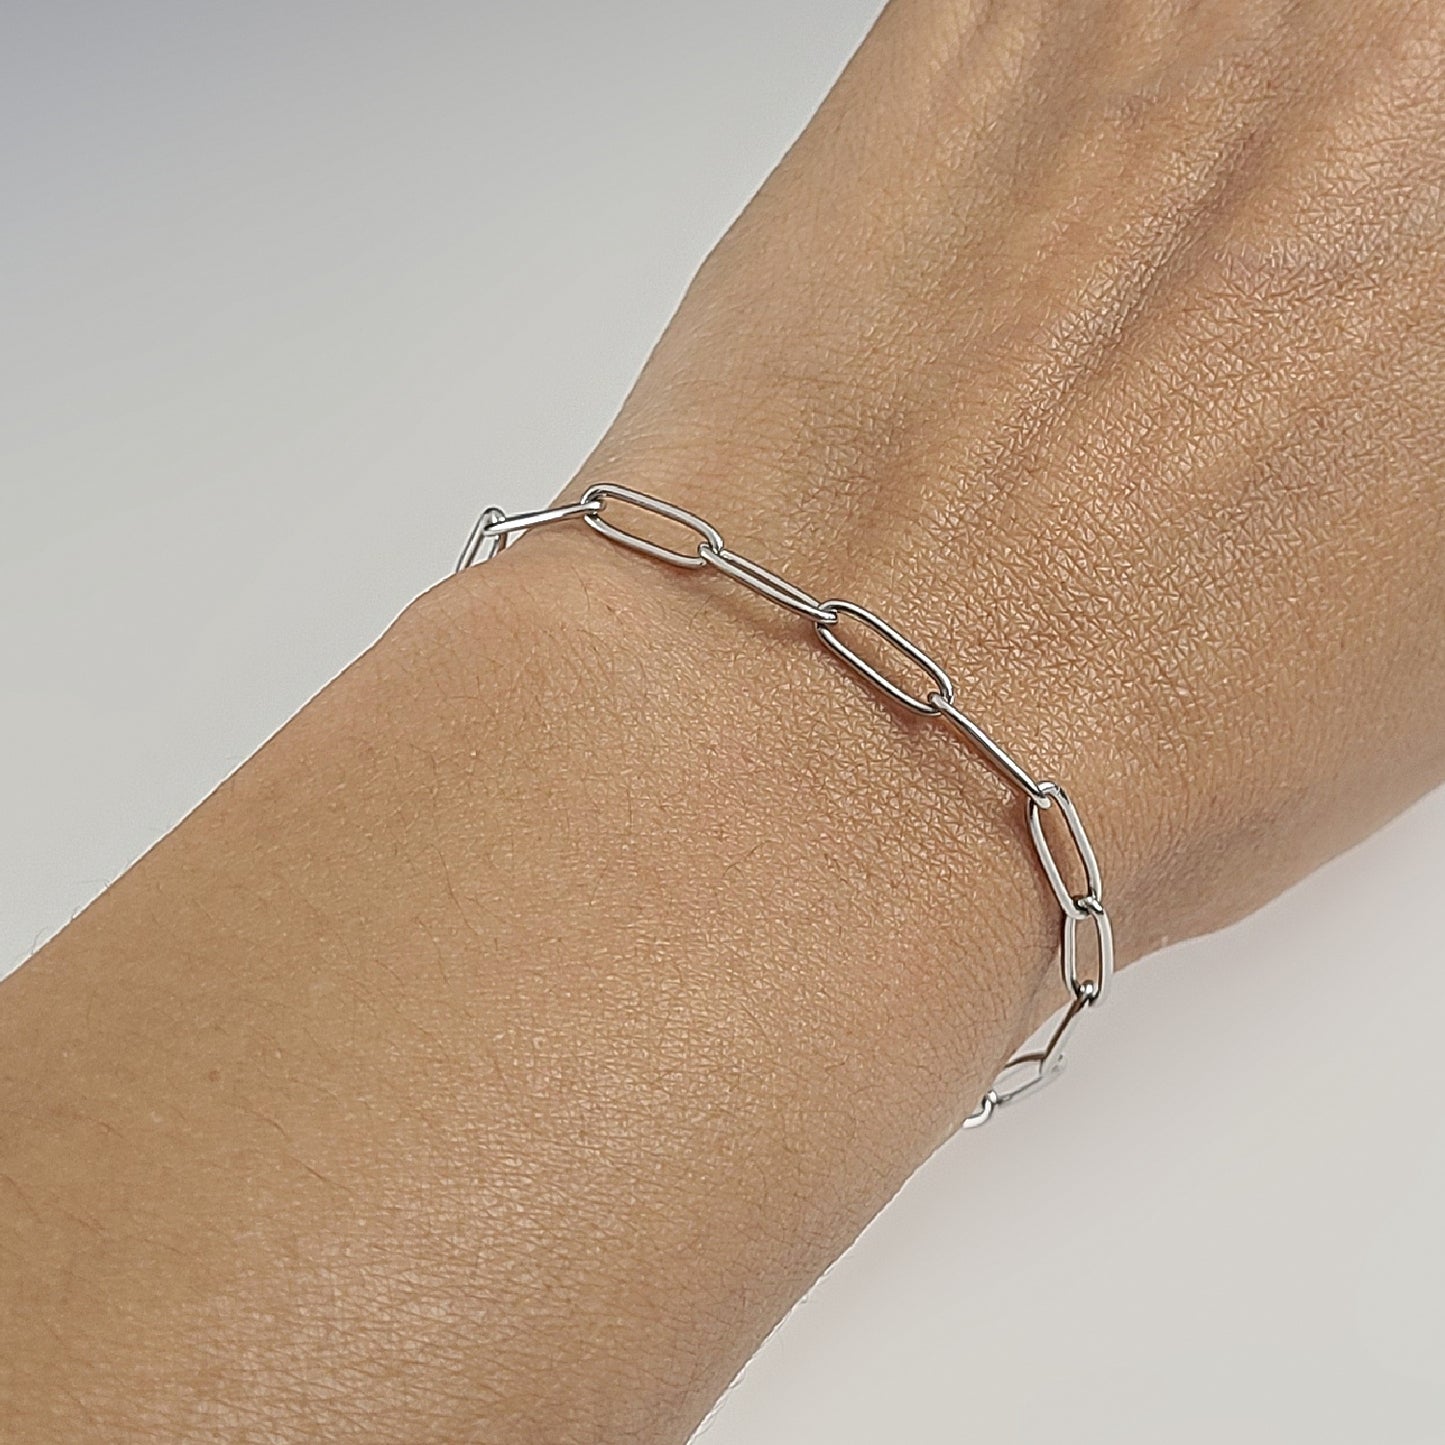 Stainless Steel Adjustable Paperclip Chain Bracelet / Anklet